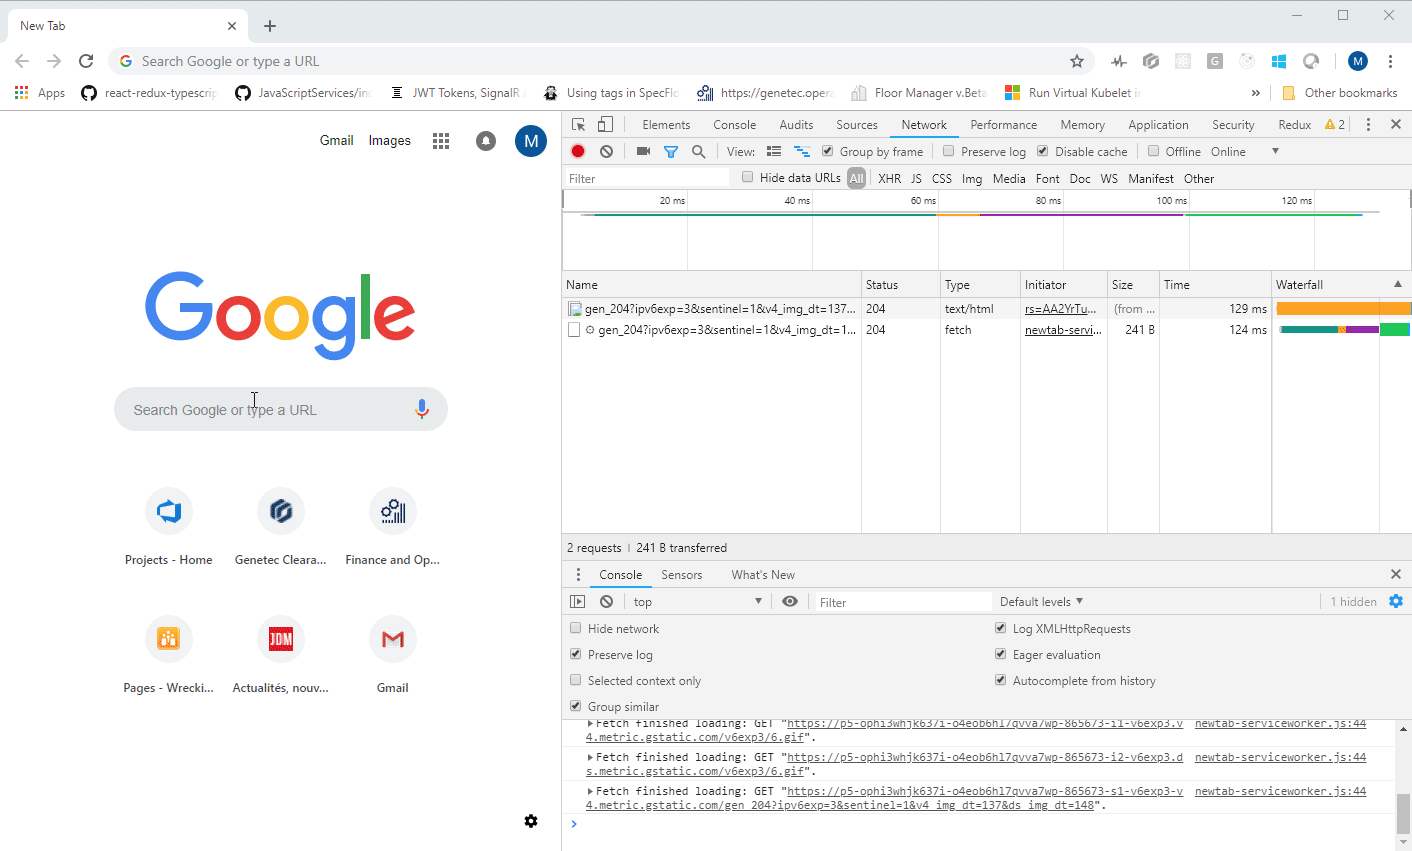 The network menu showing the error messages being saved as HAR with content